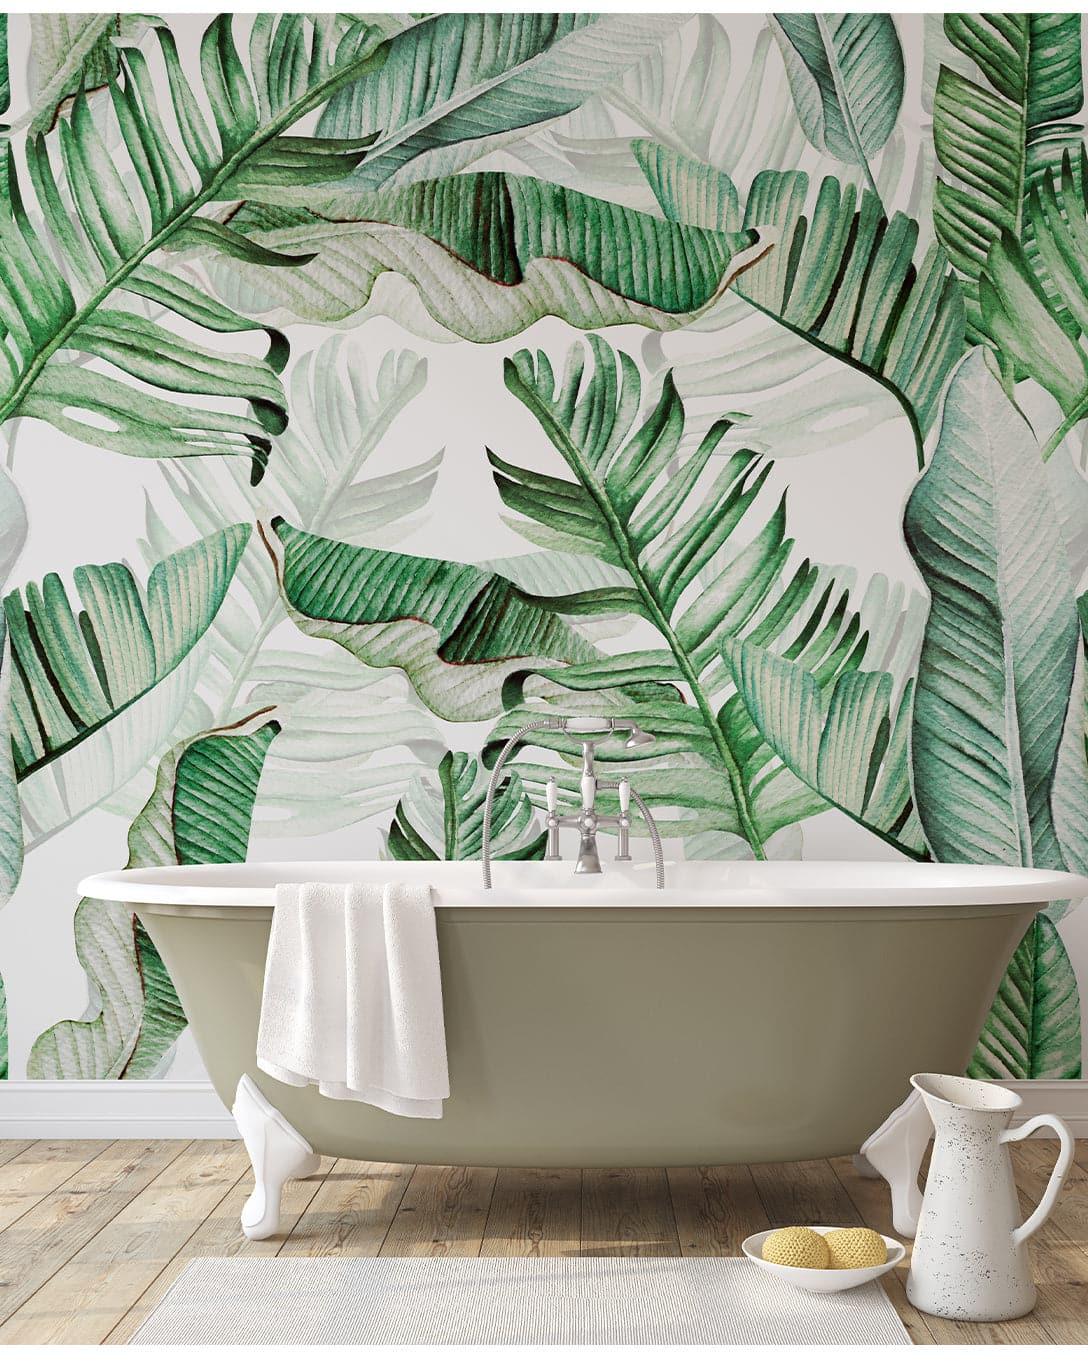 Watercolor Tropical Leaves Exotic Green Palm Leaves Wall Mural Watercolor Tropical Leaves Exotic Green Palm Leaves Wall Mural Watercolor Tropical Leaves Exotic Green Palm Leaves Wall Mural 